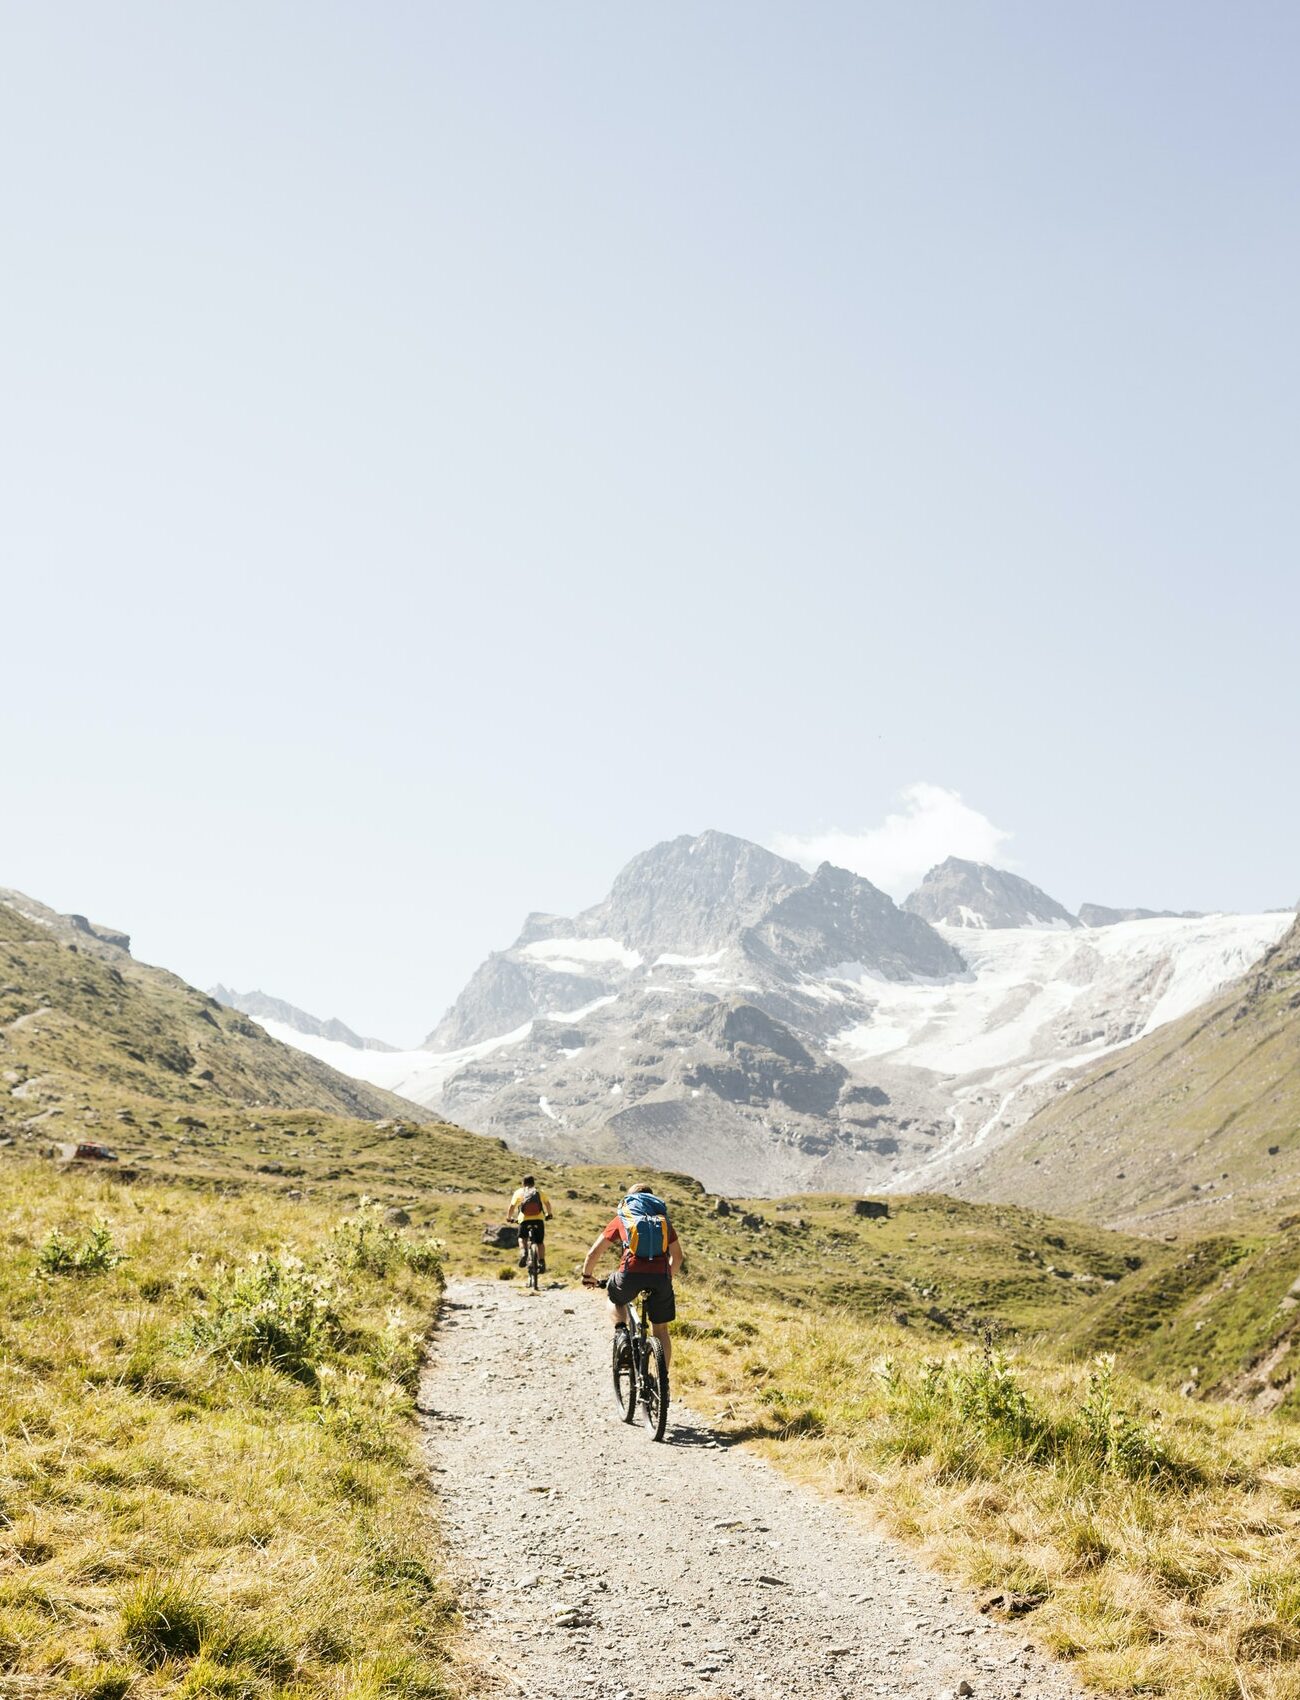 Rear view of cyclists cycling to snow capped mountain range, Partenen, Vorarlberg, Austria